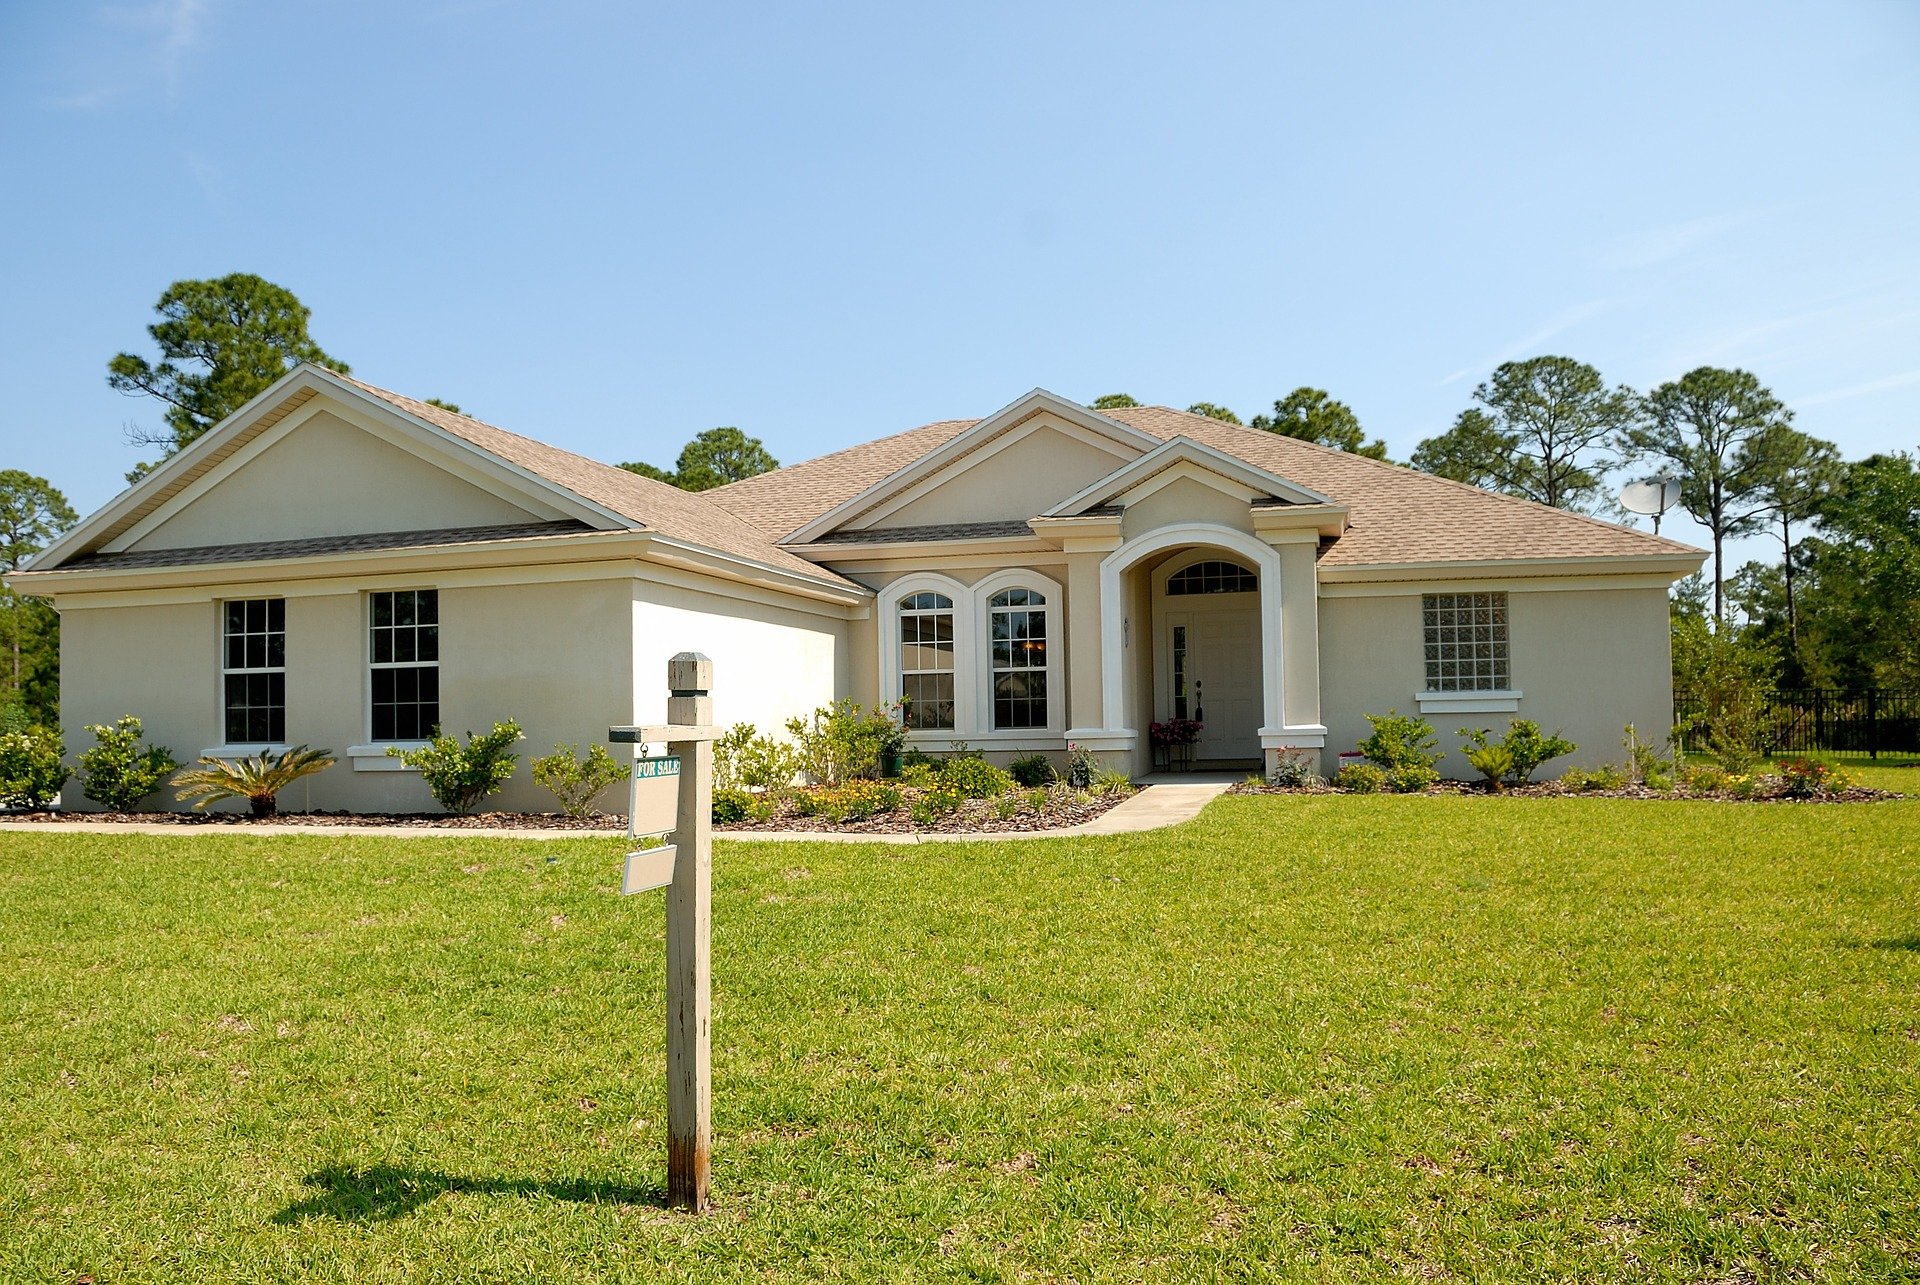 Florida home why should you get a home inspection